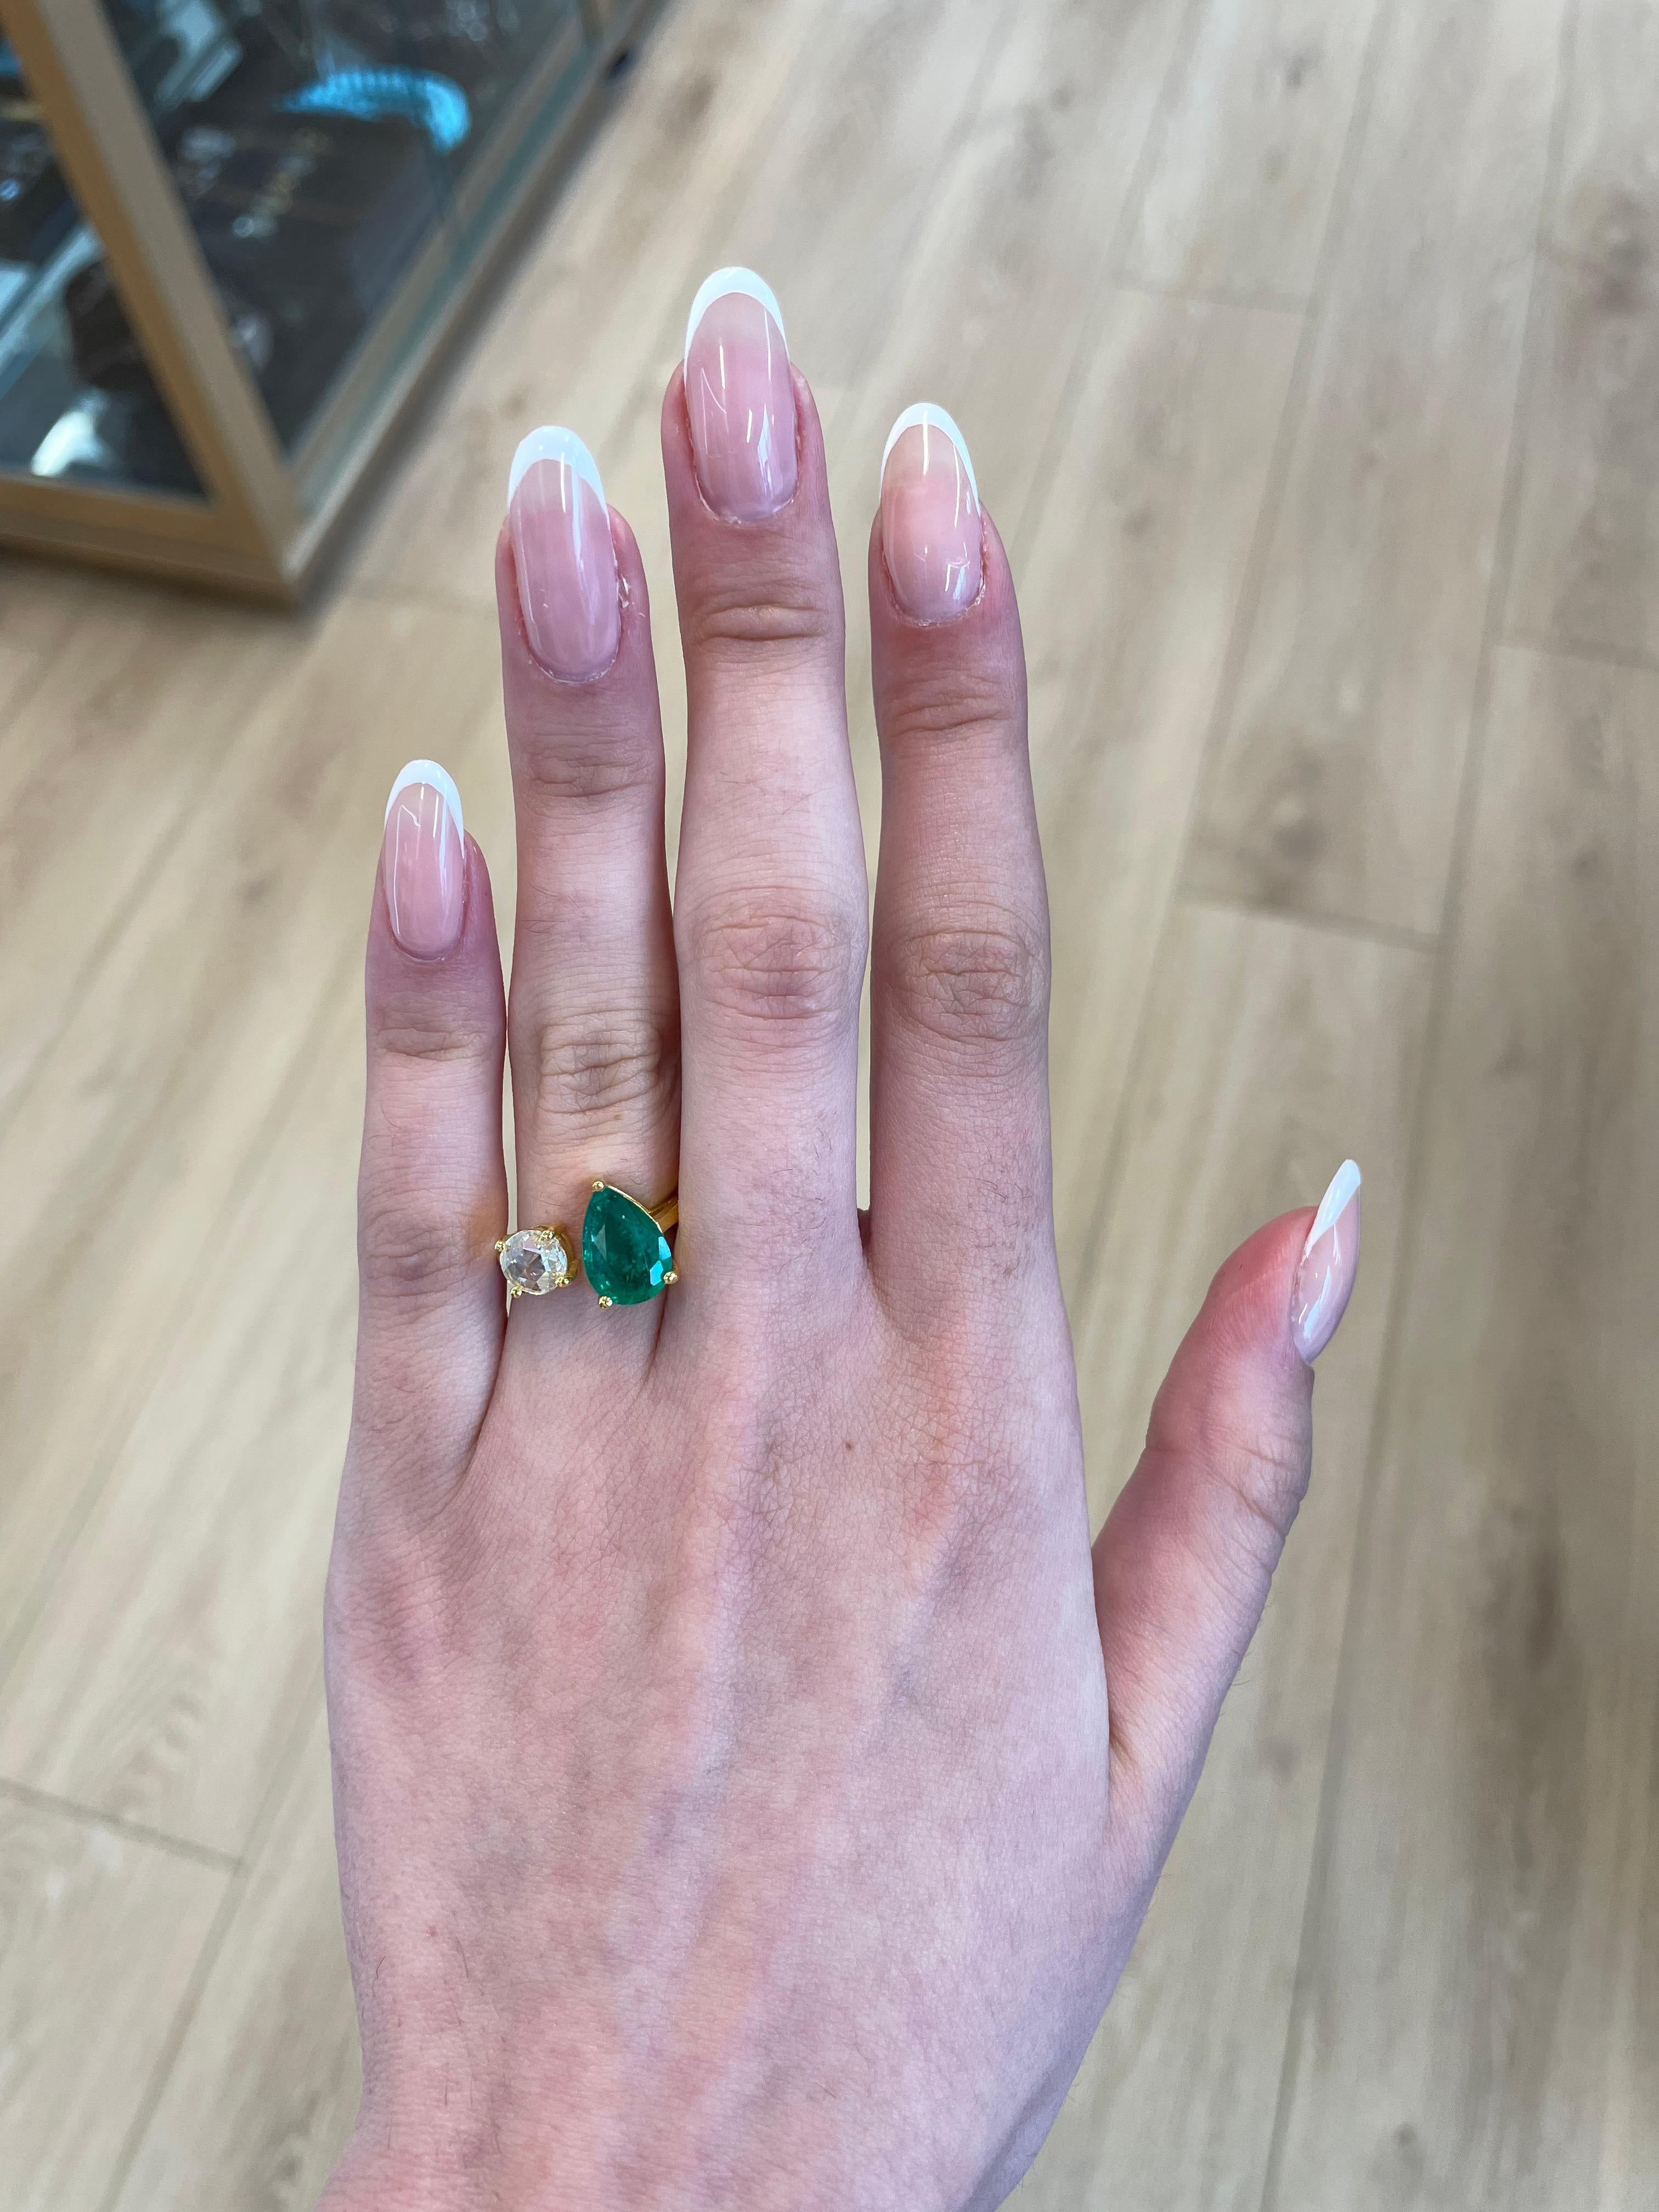 Stunning modern floating emerald and diamond toi et moi ring. By Alexander Beverly Hills.
1 pear shape emeralds, 1.93 carats apx F2. 1 round rose cut diamond 0.56 carats, approximately G/H color and VS clarity. 18-karat yellow gold, 4.97 grams,